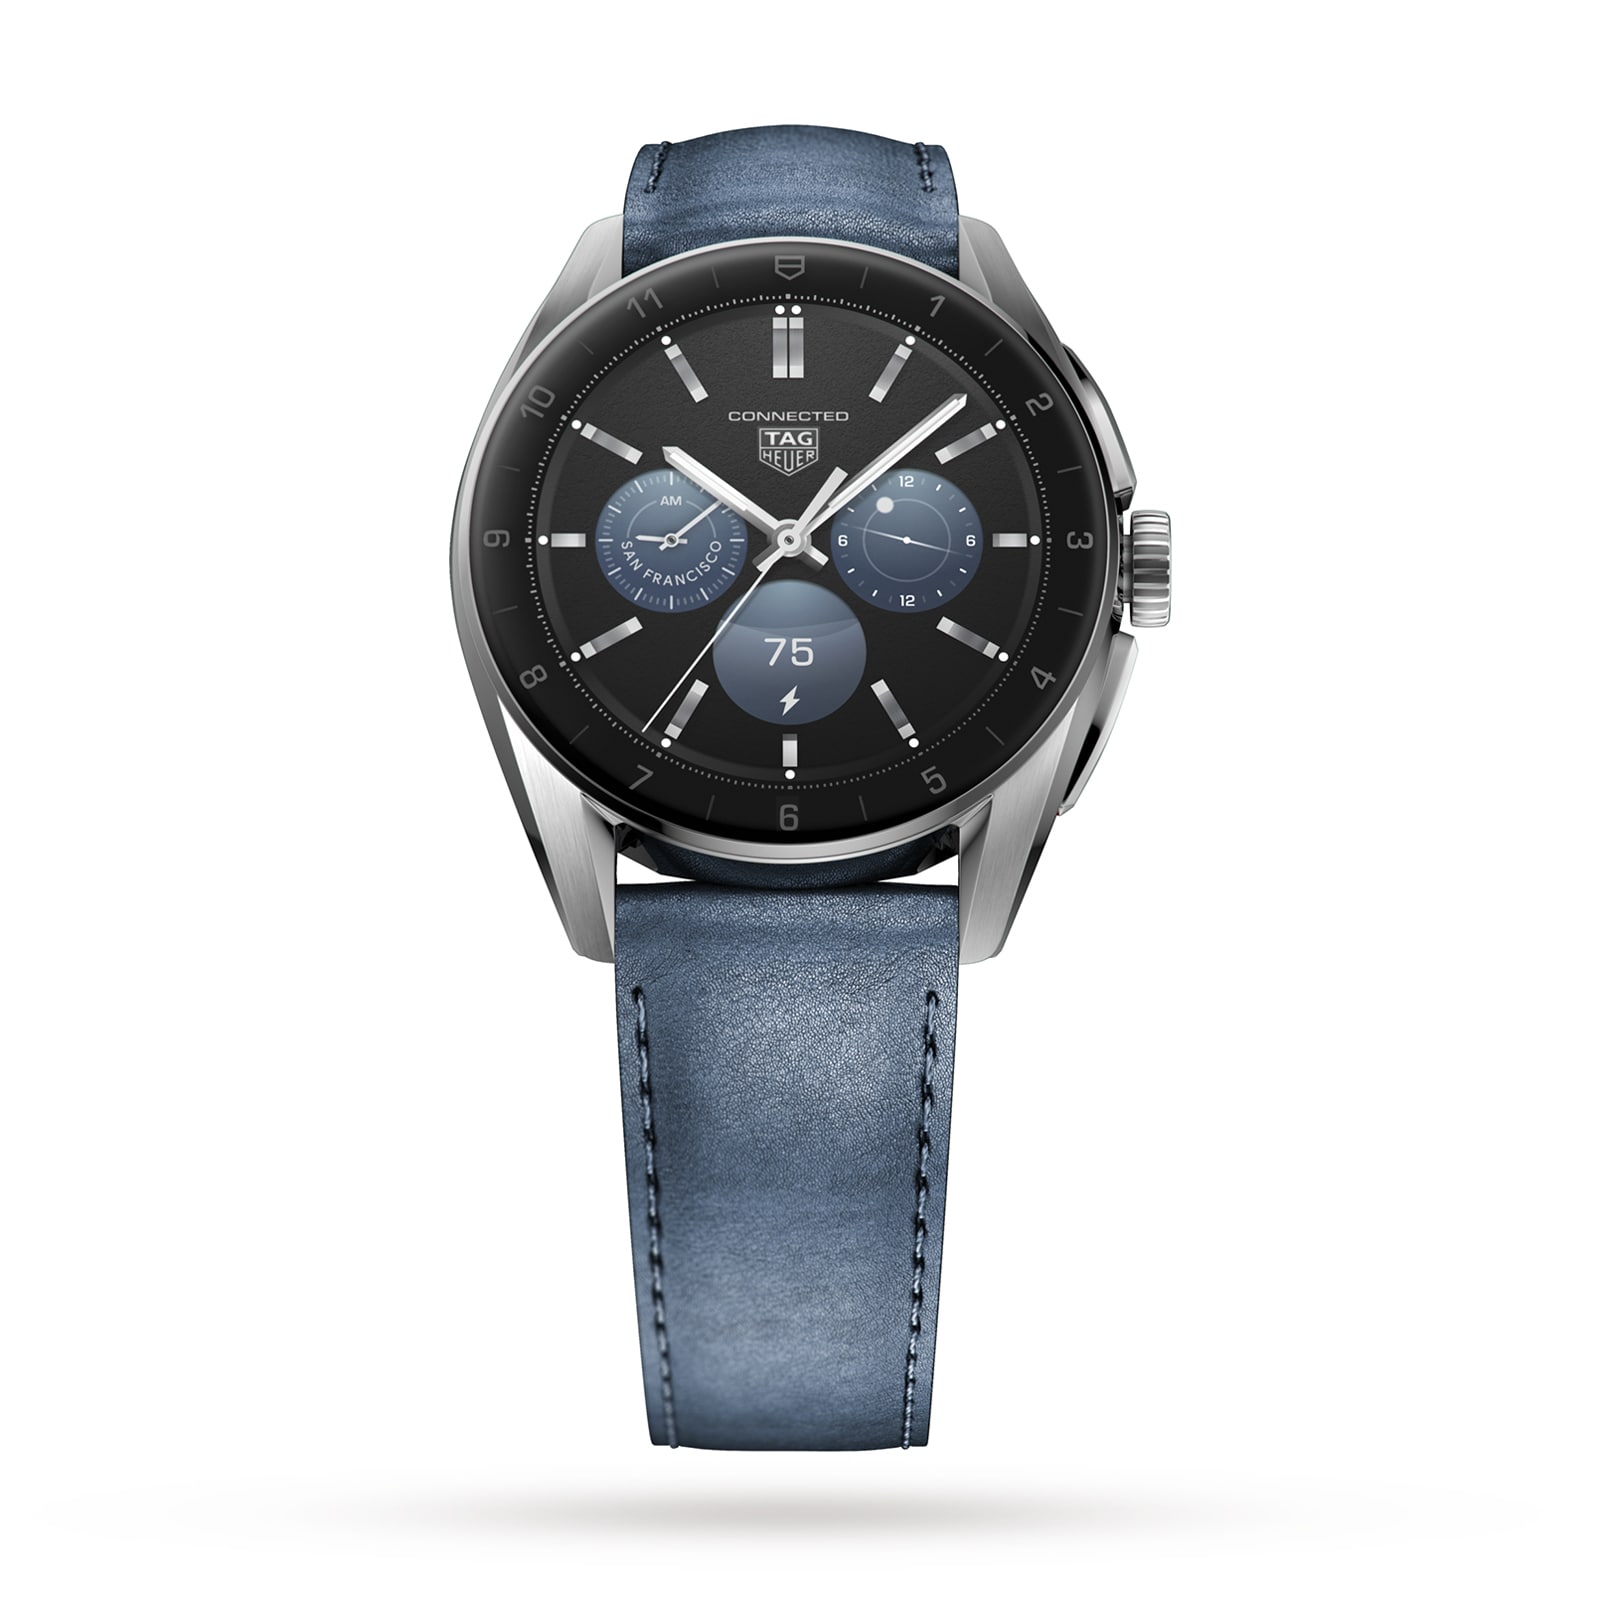 Connected Limited Edition Mens Watch Blue Strap